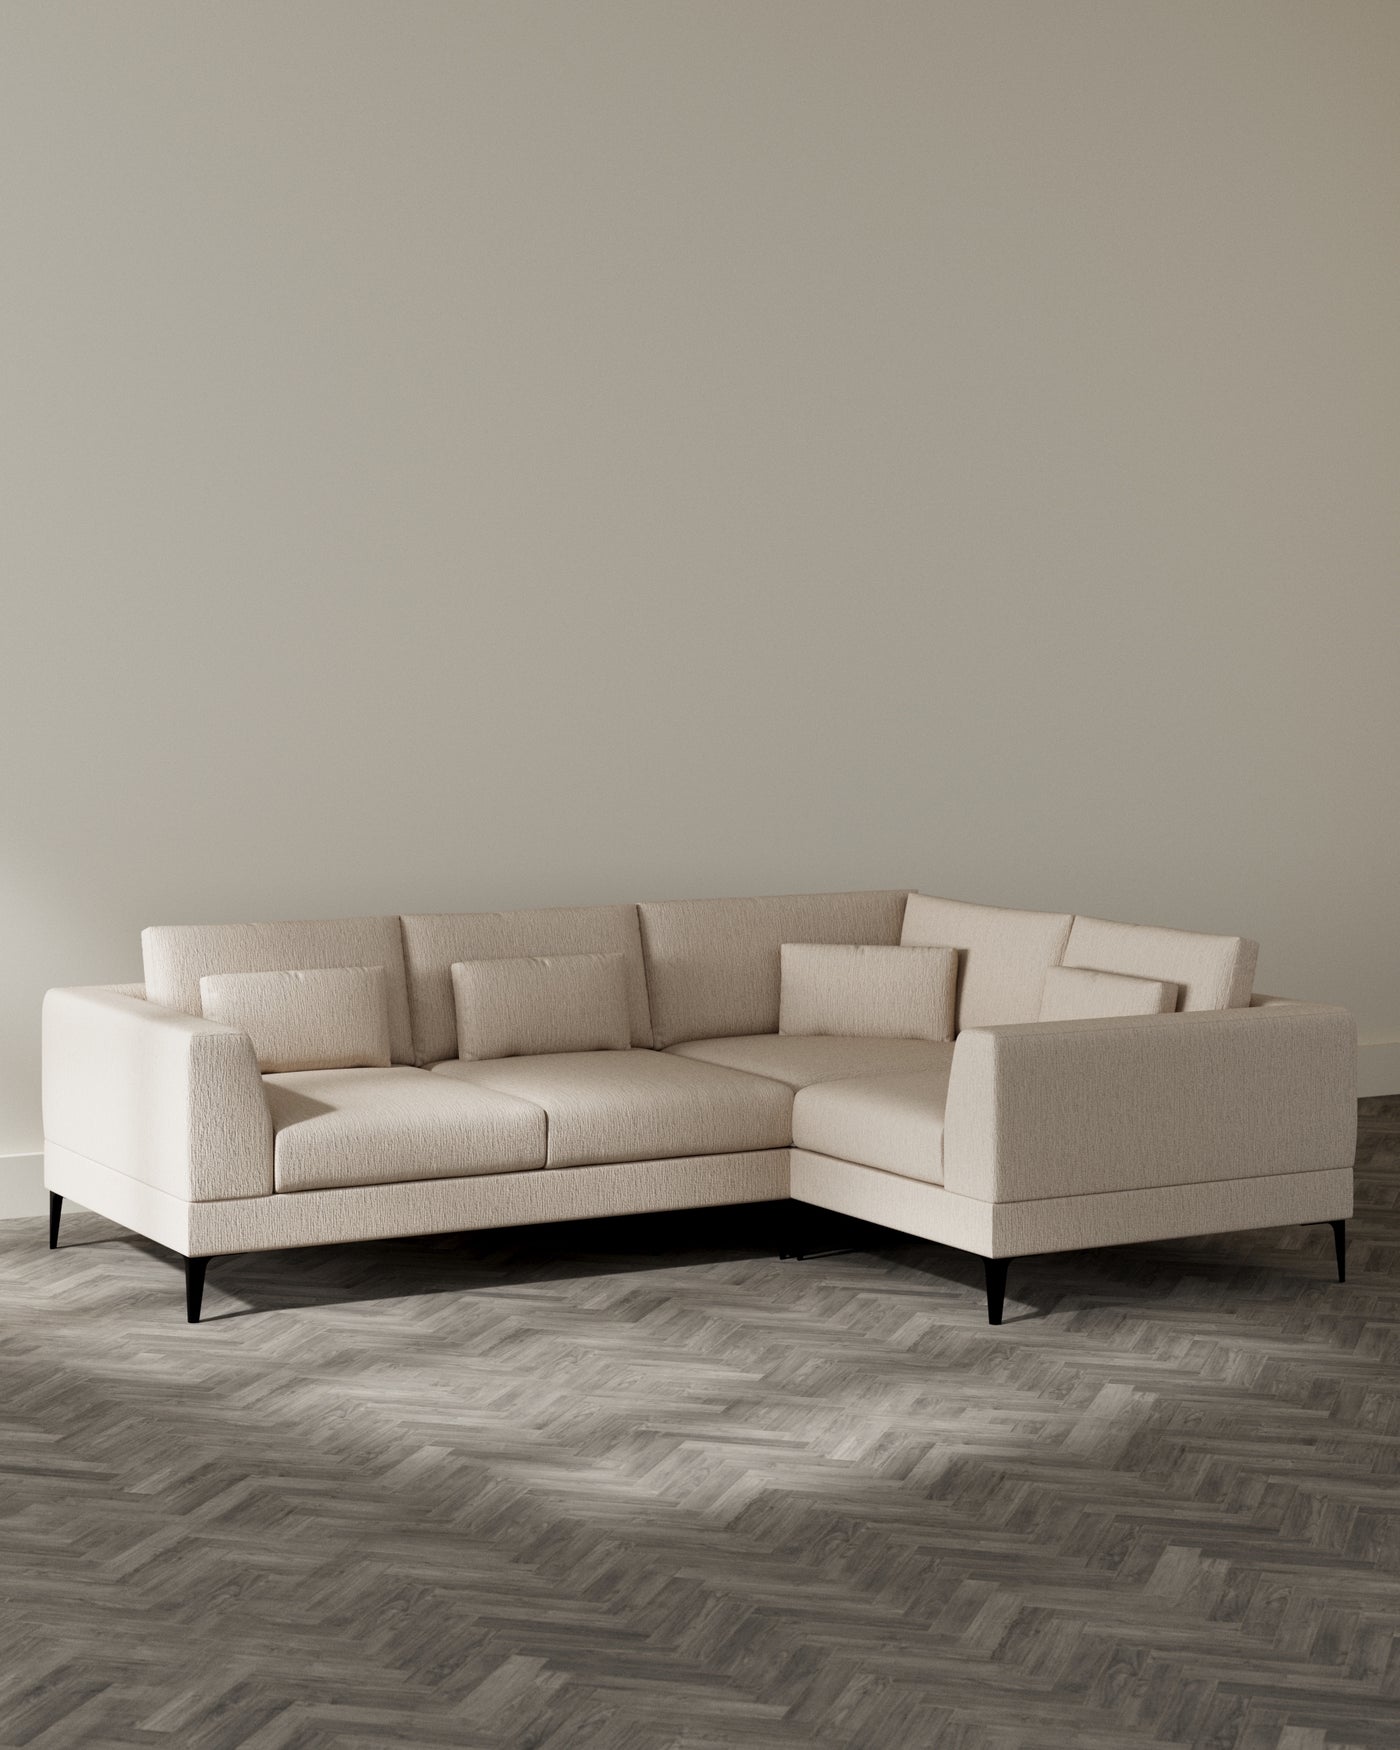 An L-shaped sectional sofa with a modern design, featuring a textured light beige fabric upholstery and clean, straight lines. The sofa has plush back cushions and a uniform seat cushion, elegantly elevated on slender black legs that provide a subtle contrast to the light upholstery. The sofa sits on a herringbone-patterned wooden floor, and the room has a neutral colour palette.